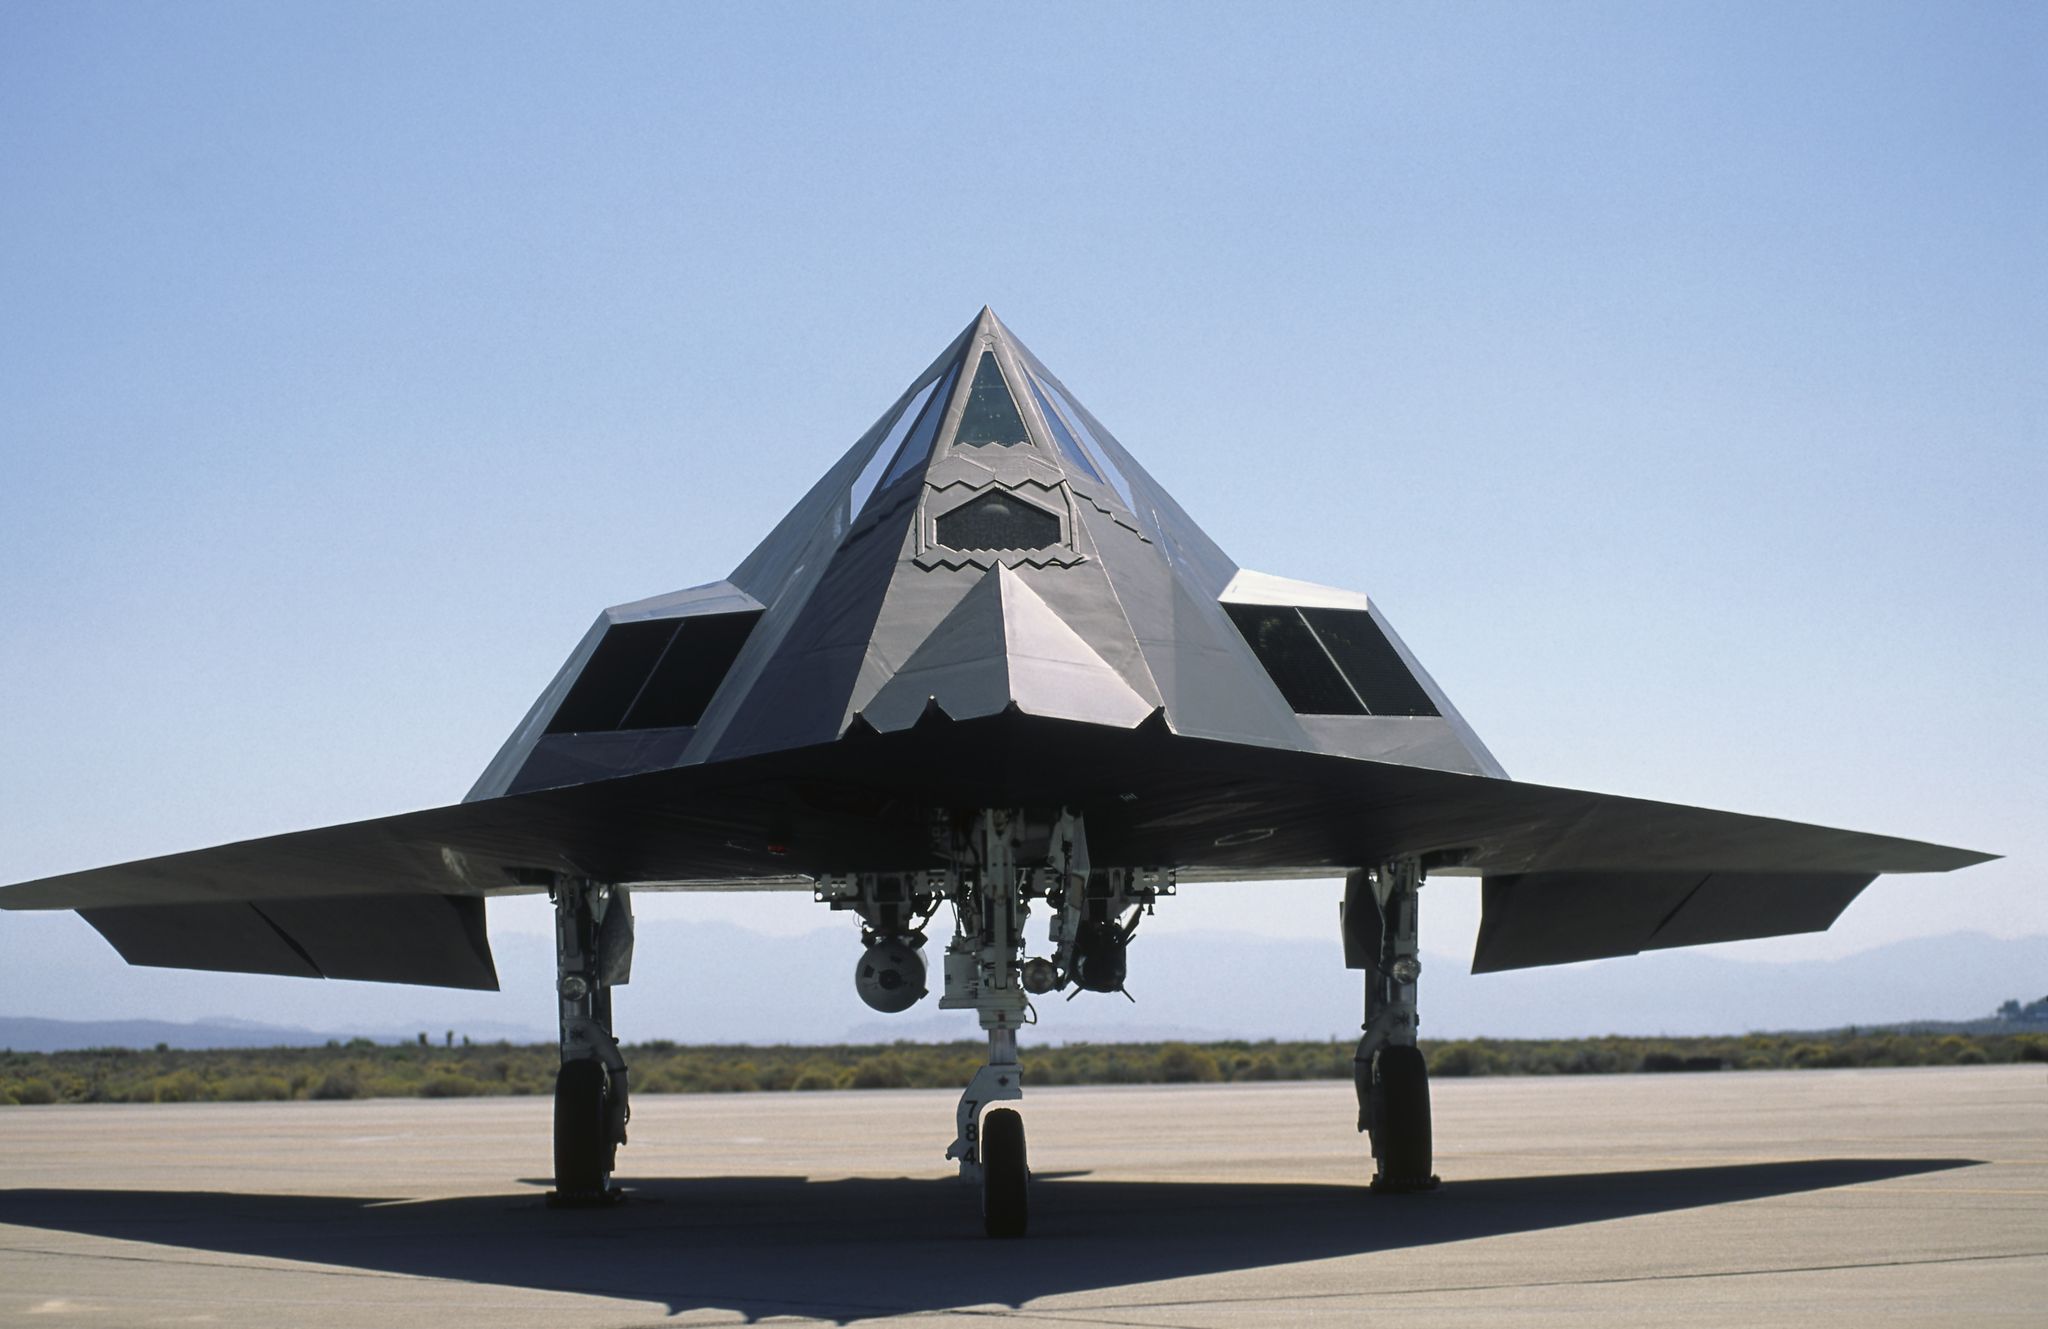 USAF Lockheed Martin F-117A Nighthawk in the static-display at the 1997 Edward AFB Open House